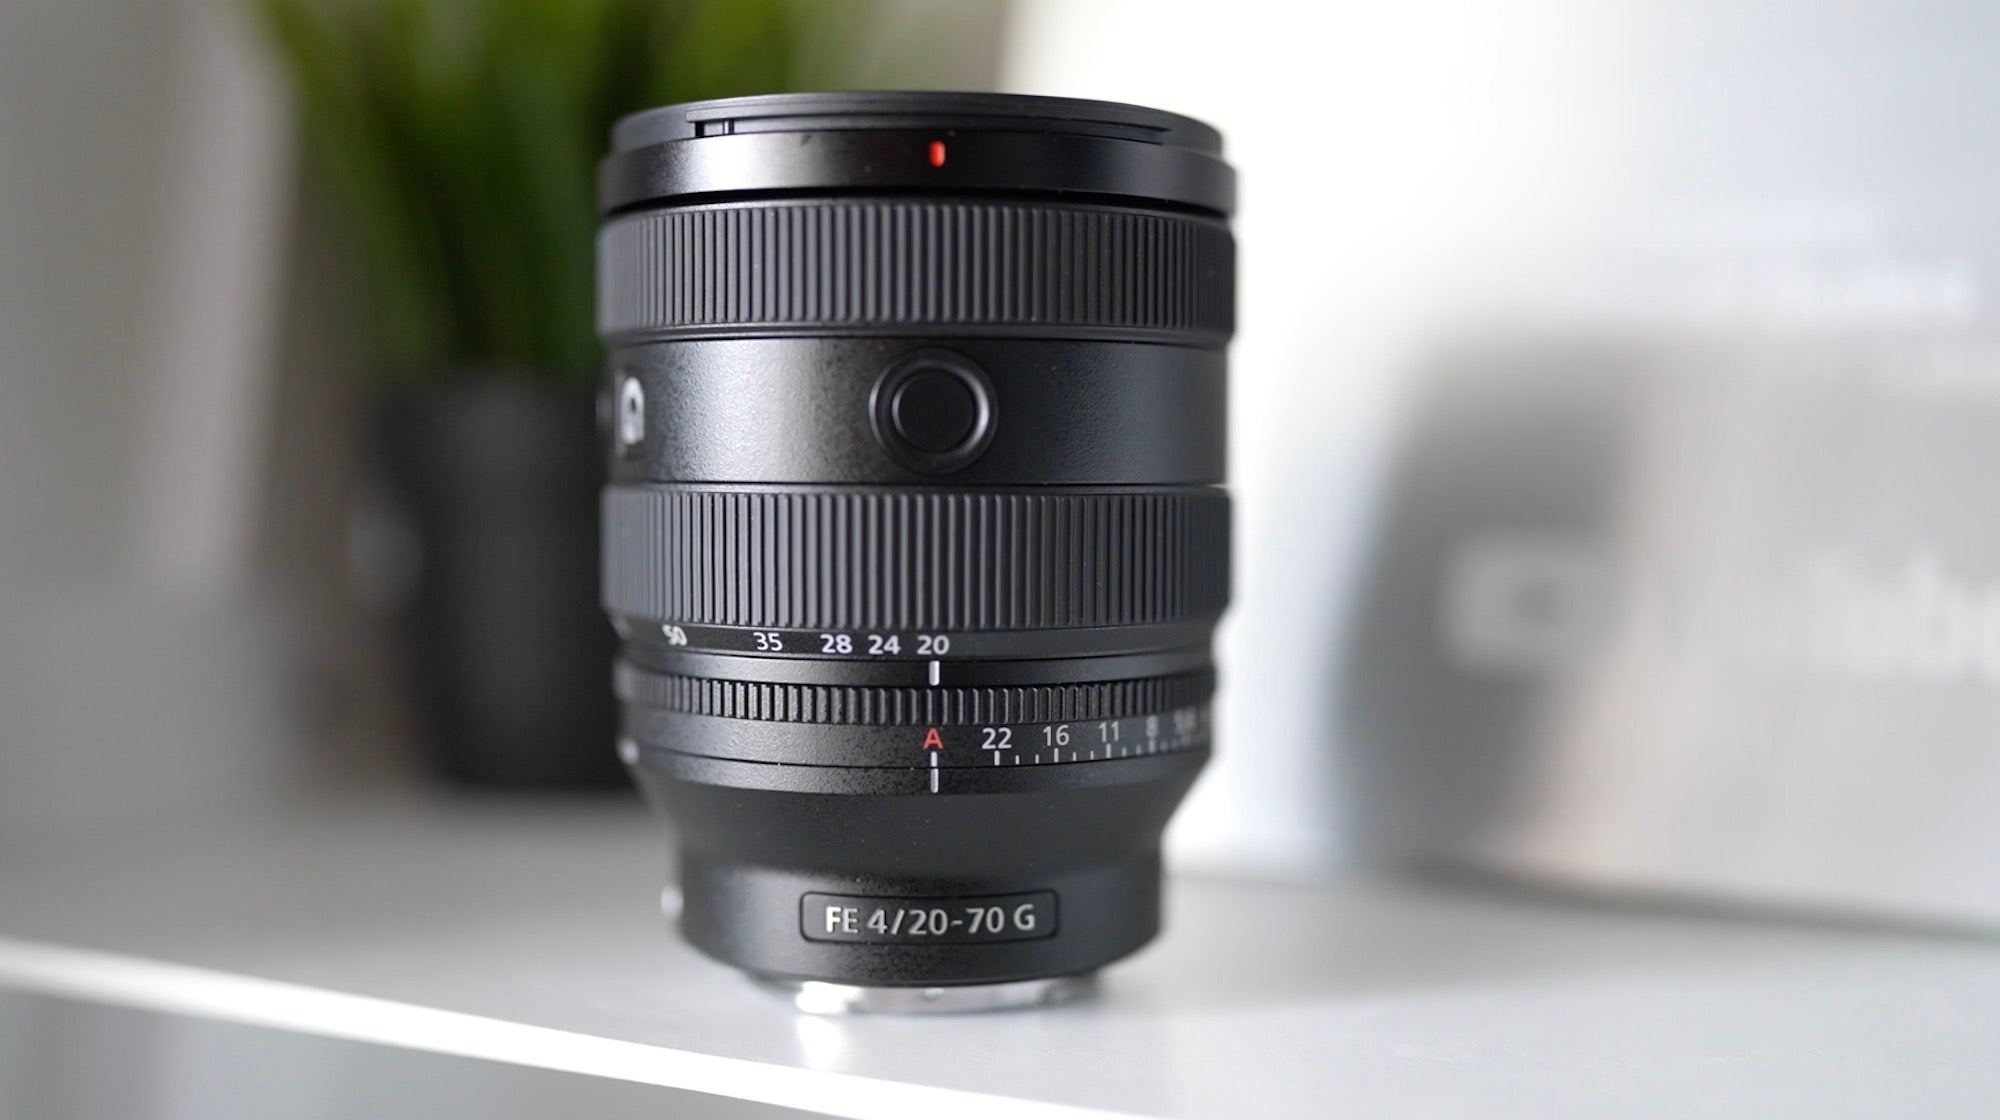 Up-Close With The New Sony 20-70mm f/4 G Zoom Sony Alpha Universe